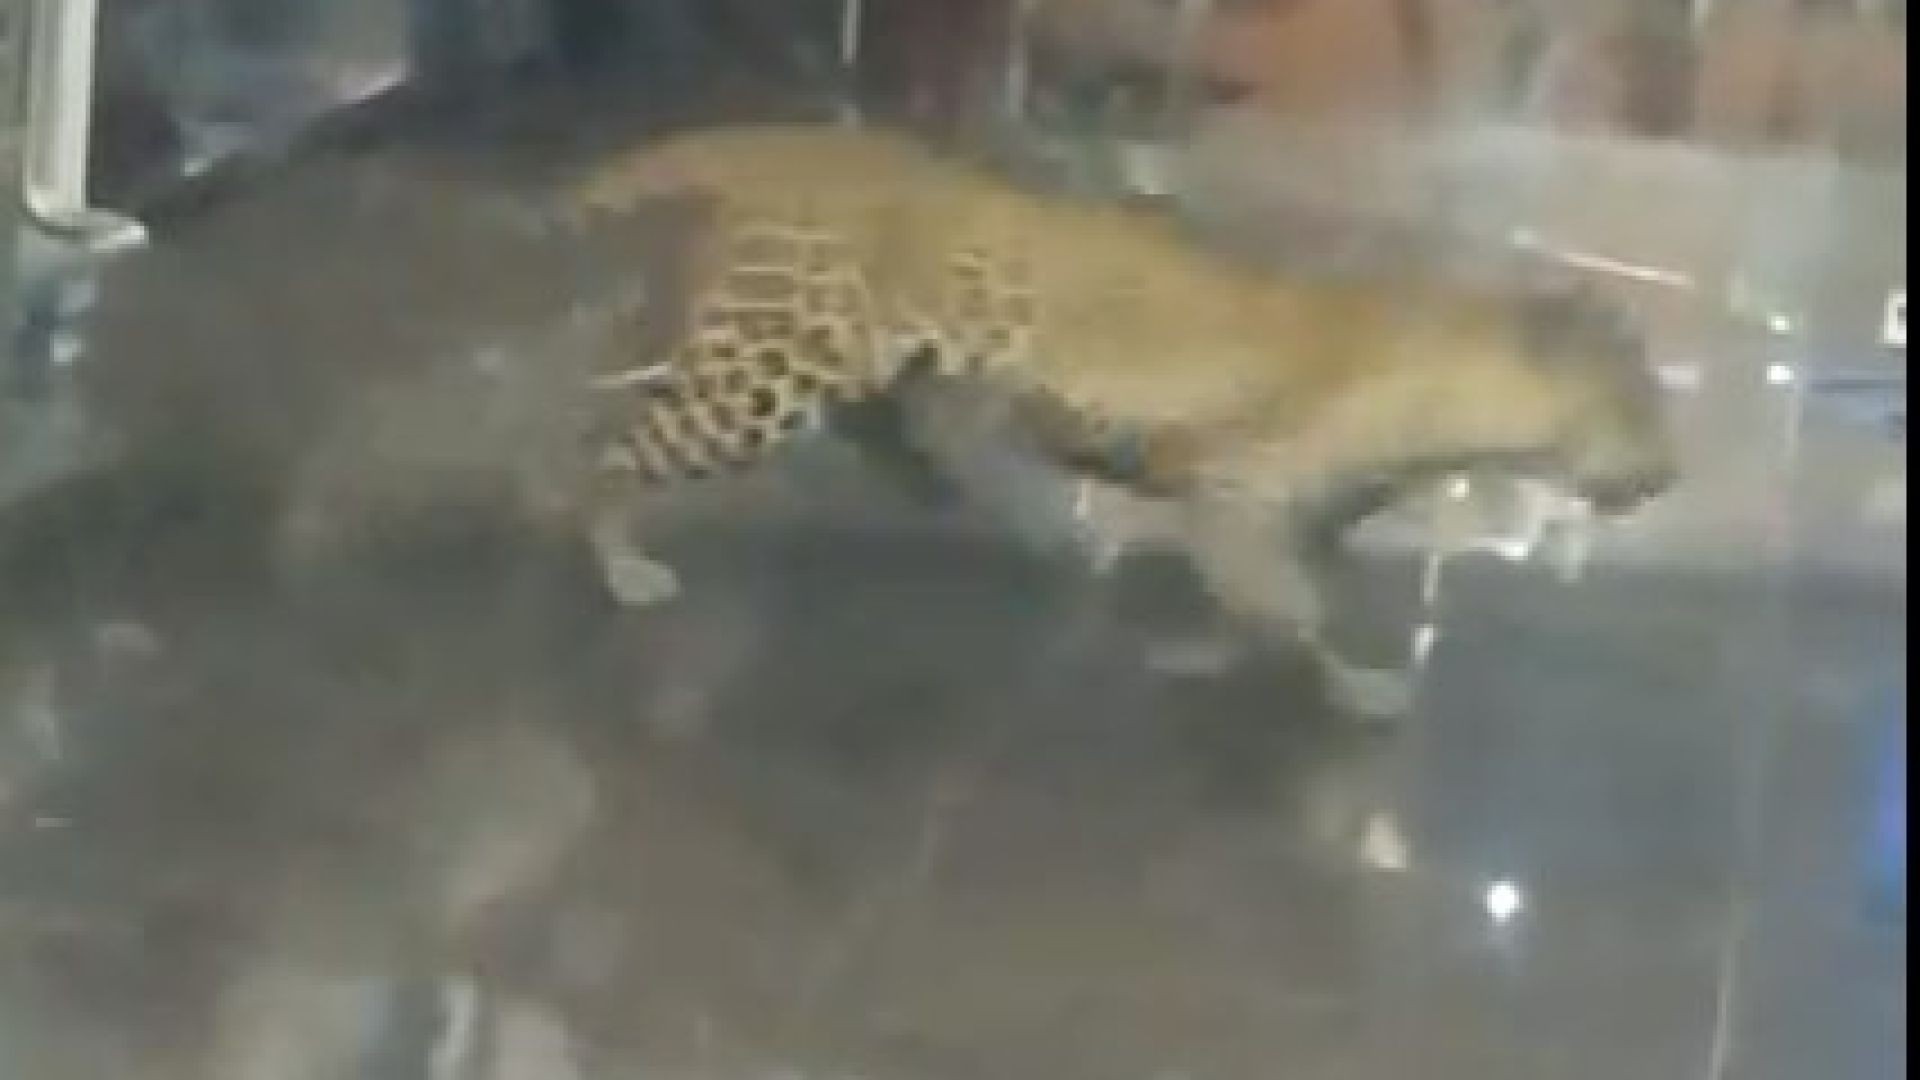 Leopard spotted at Kazipally industrial area Hetero Labs compound